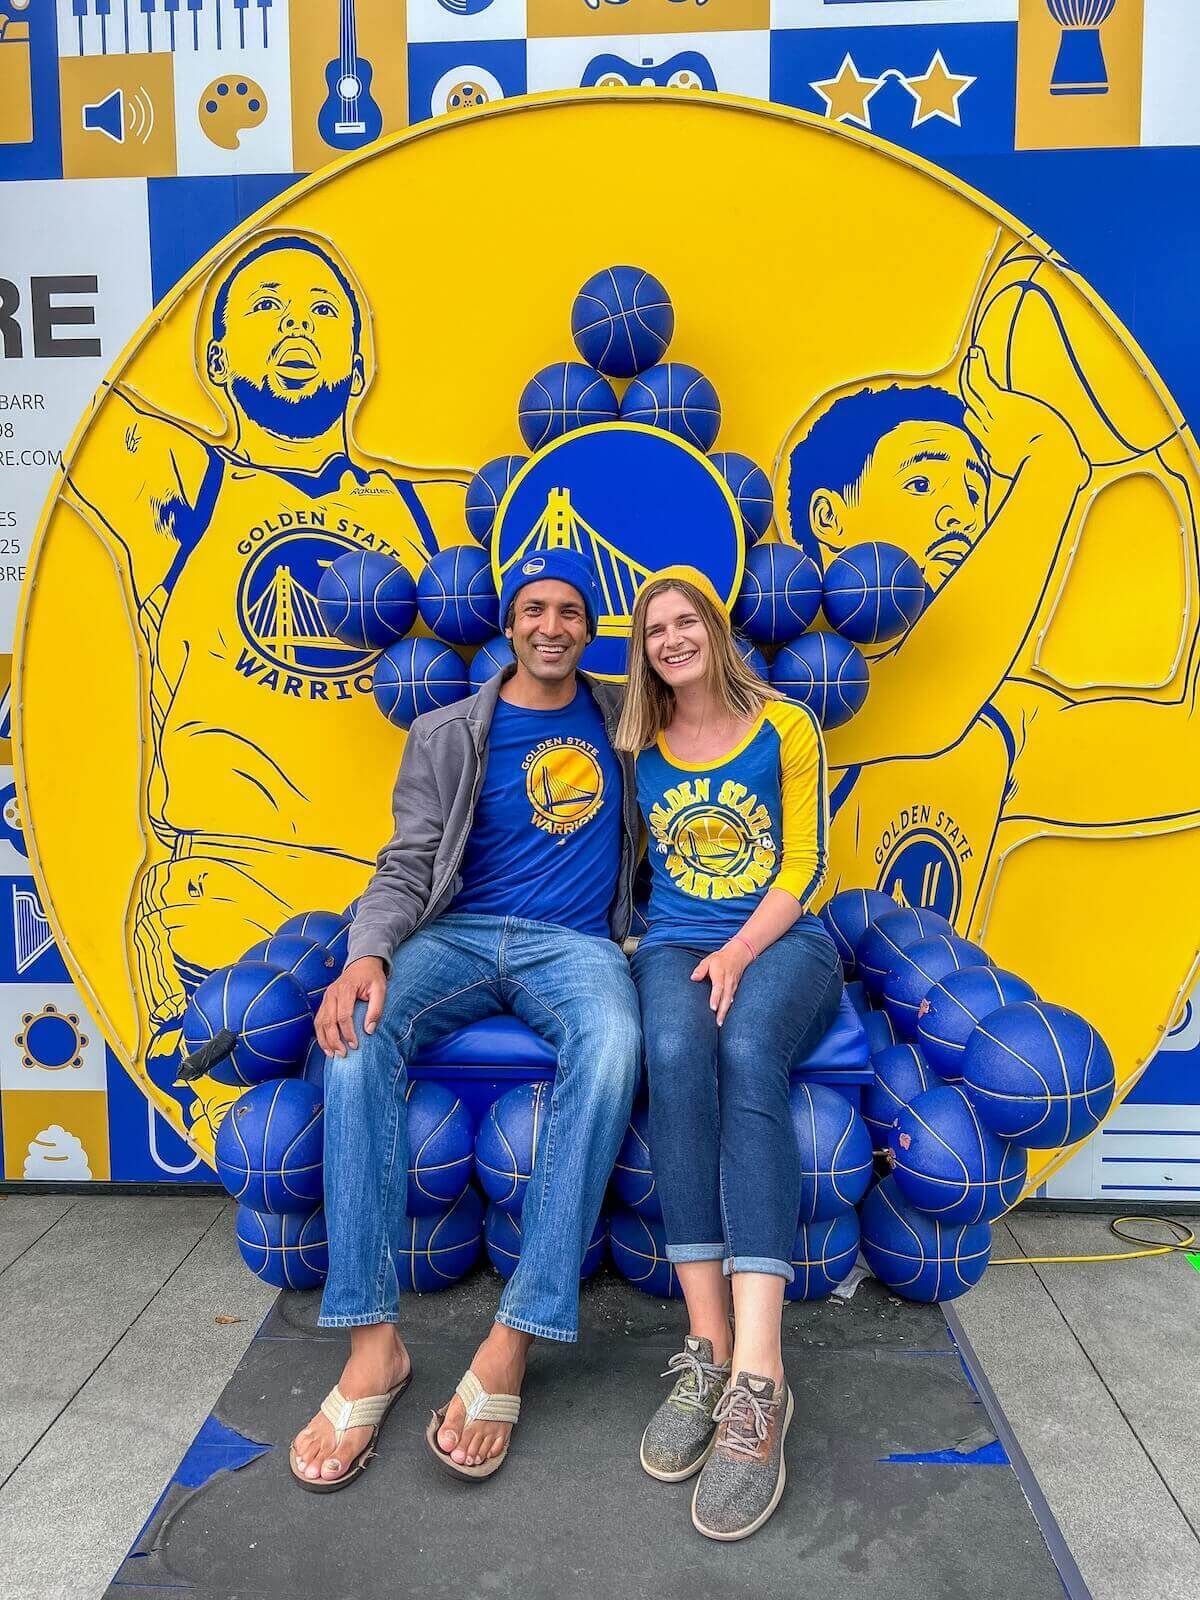 A man and a woman deck out i a yellow and blue Warriors gear poses in front of a Warriors backdrop.